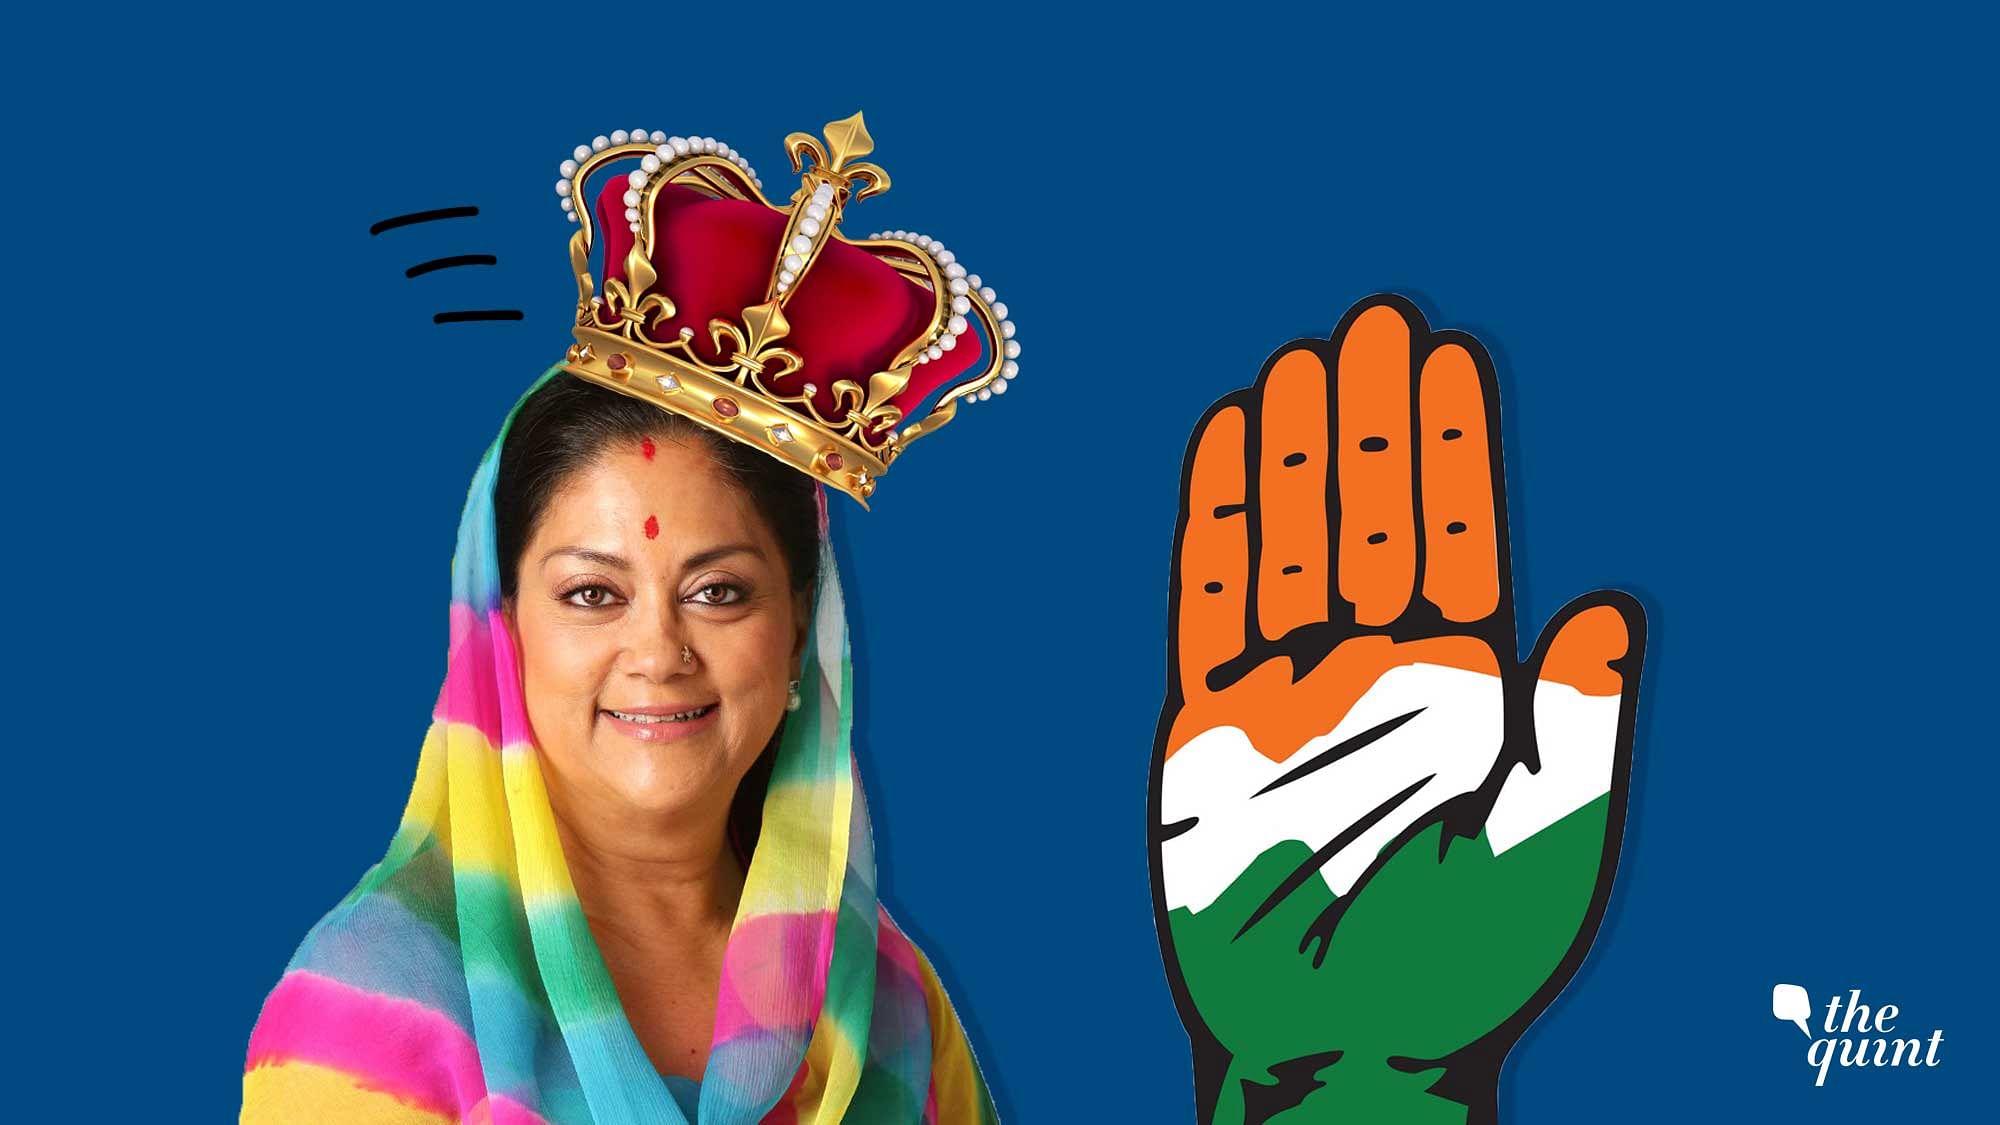 With some like the BJP MLA Sheo Manvendra Singh quitting the party and joining Congress in Rajasthan, incumbent CM Raje has an uphill task ahead.